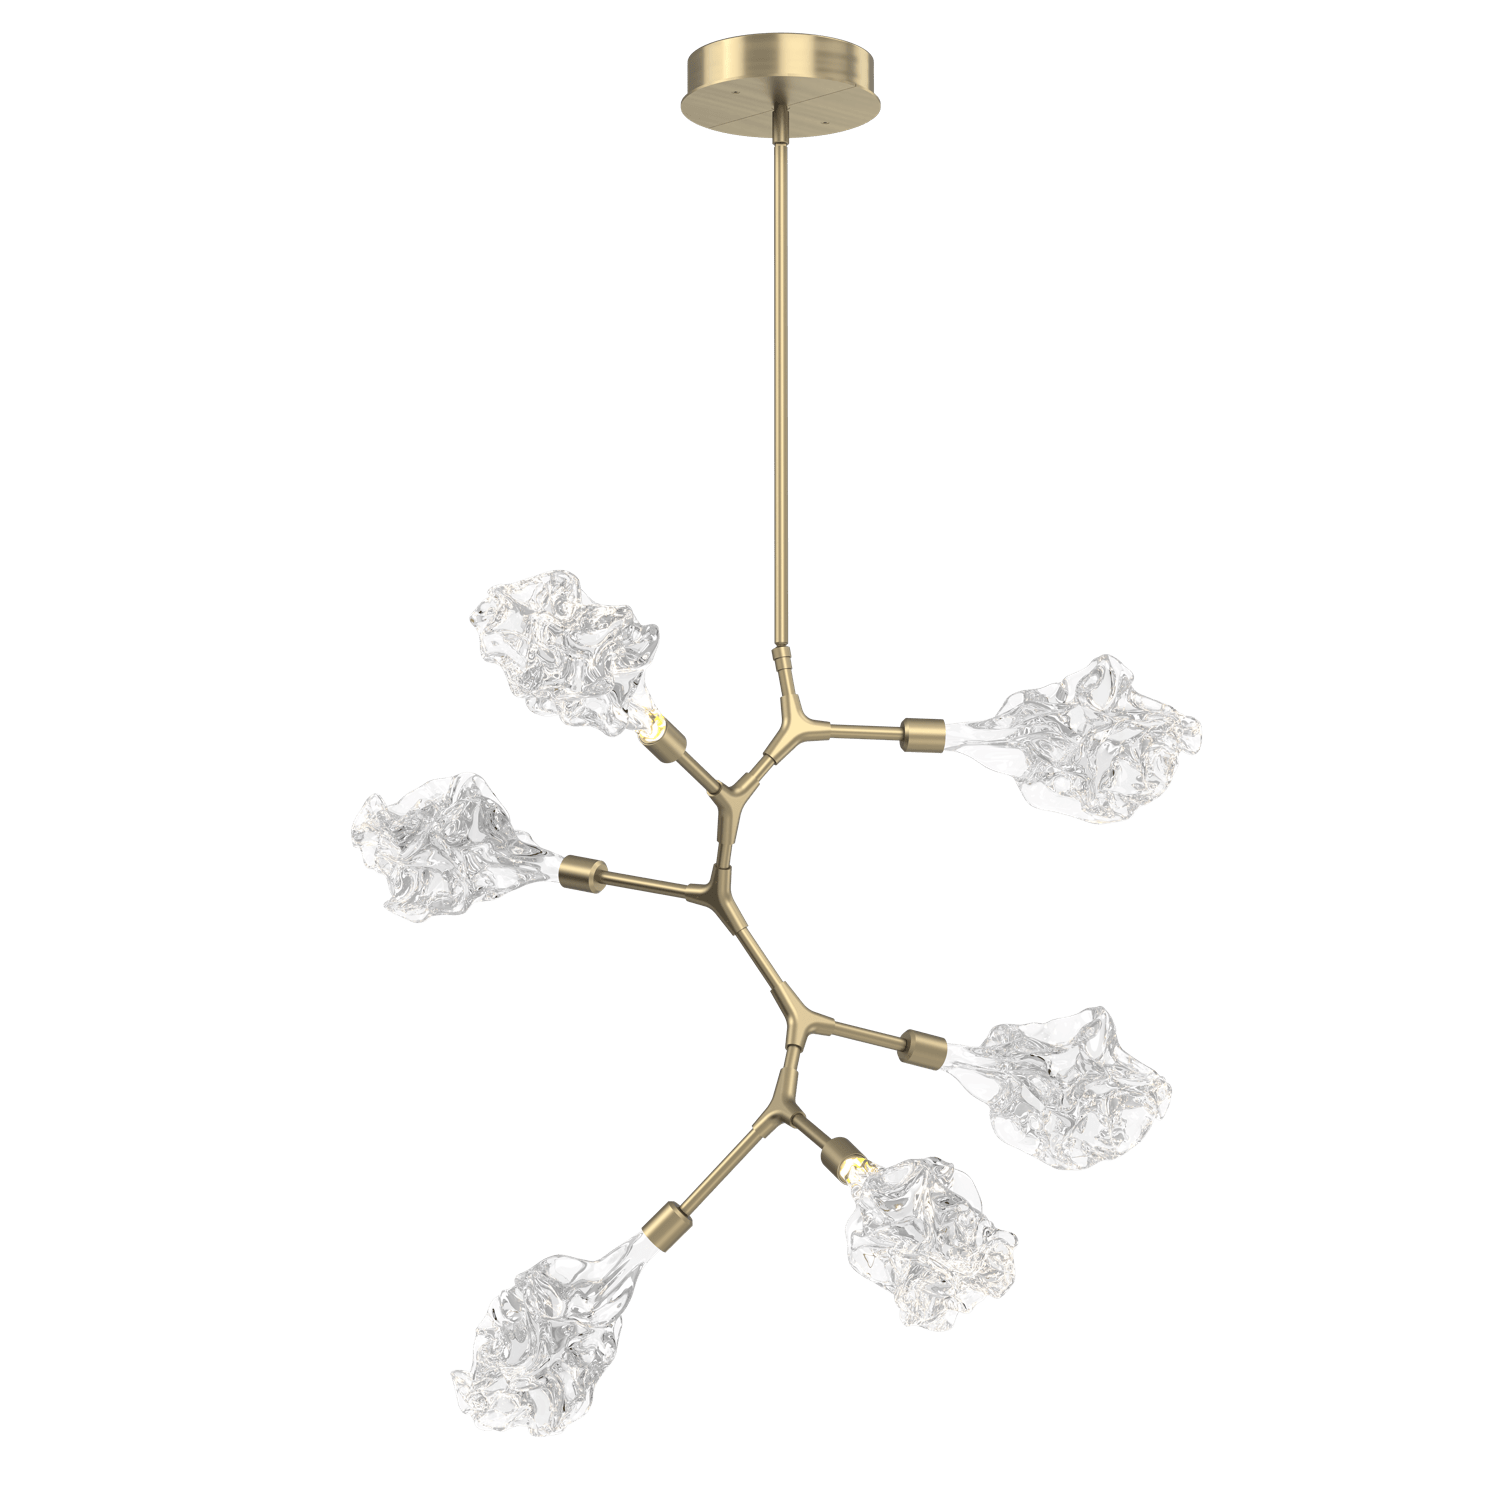 CHB0059-VA-HB-Hammerton-Studio-Blossom-6-light-organic-vine-chandelier-with-heritage-brass-finish-and-clear-handblown-crystal-glass-shades-and-LED-lamping